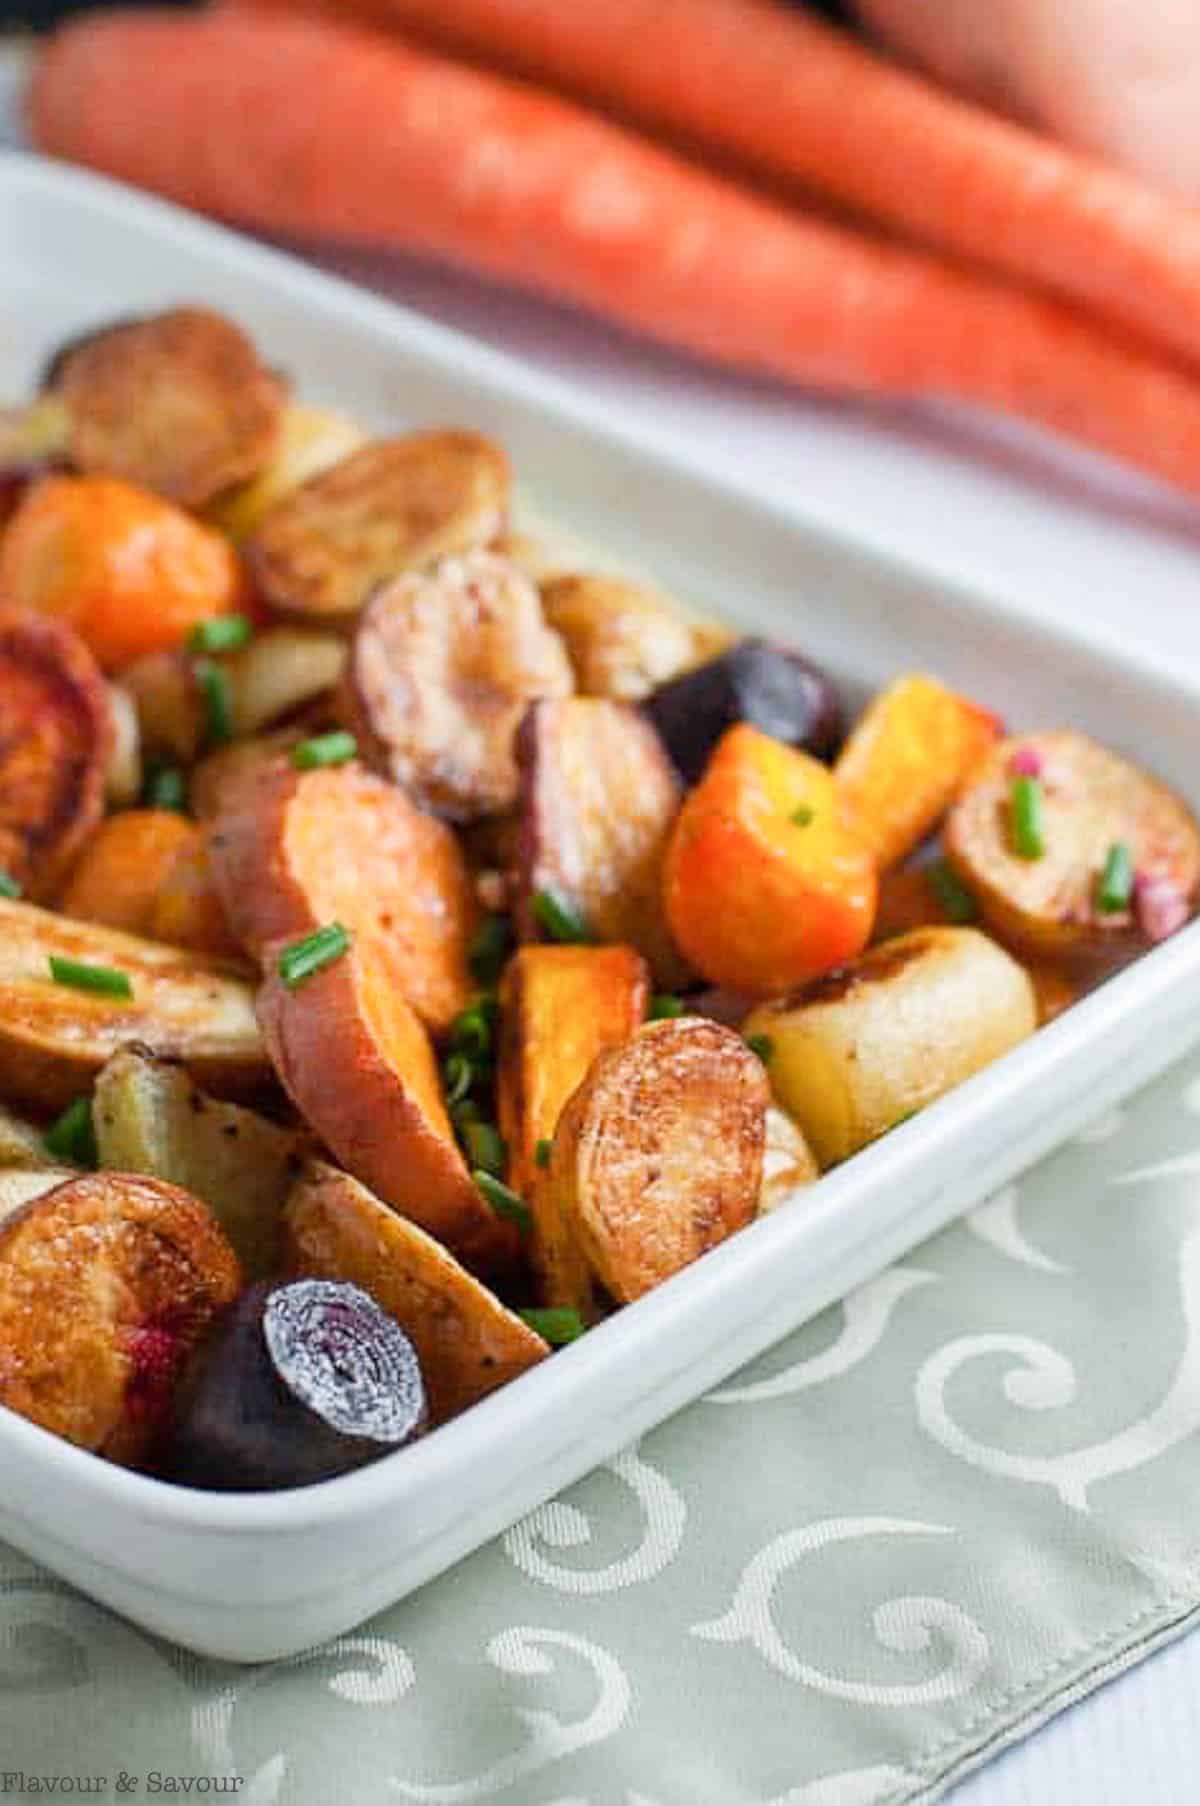 apple cider roasted root vegetables with whole carrots in the background.